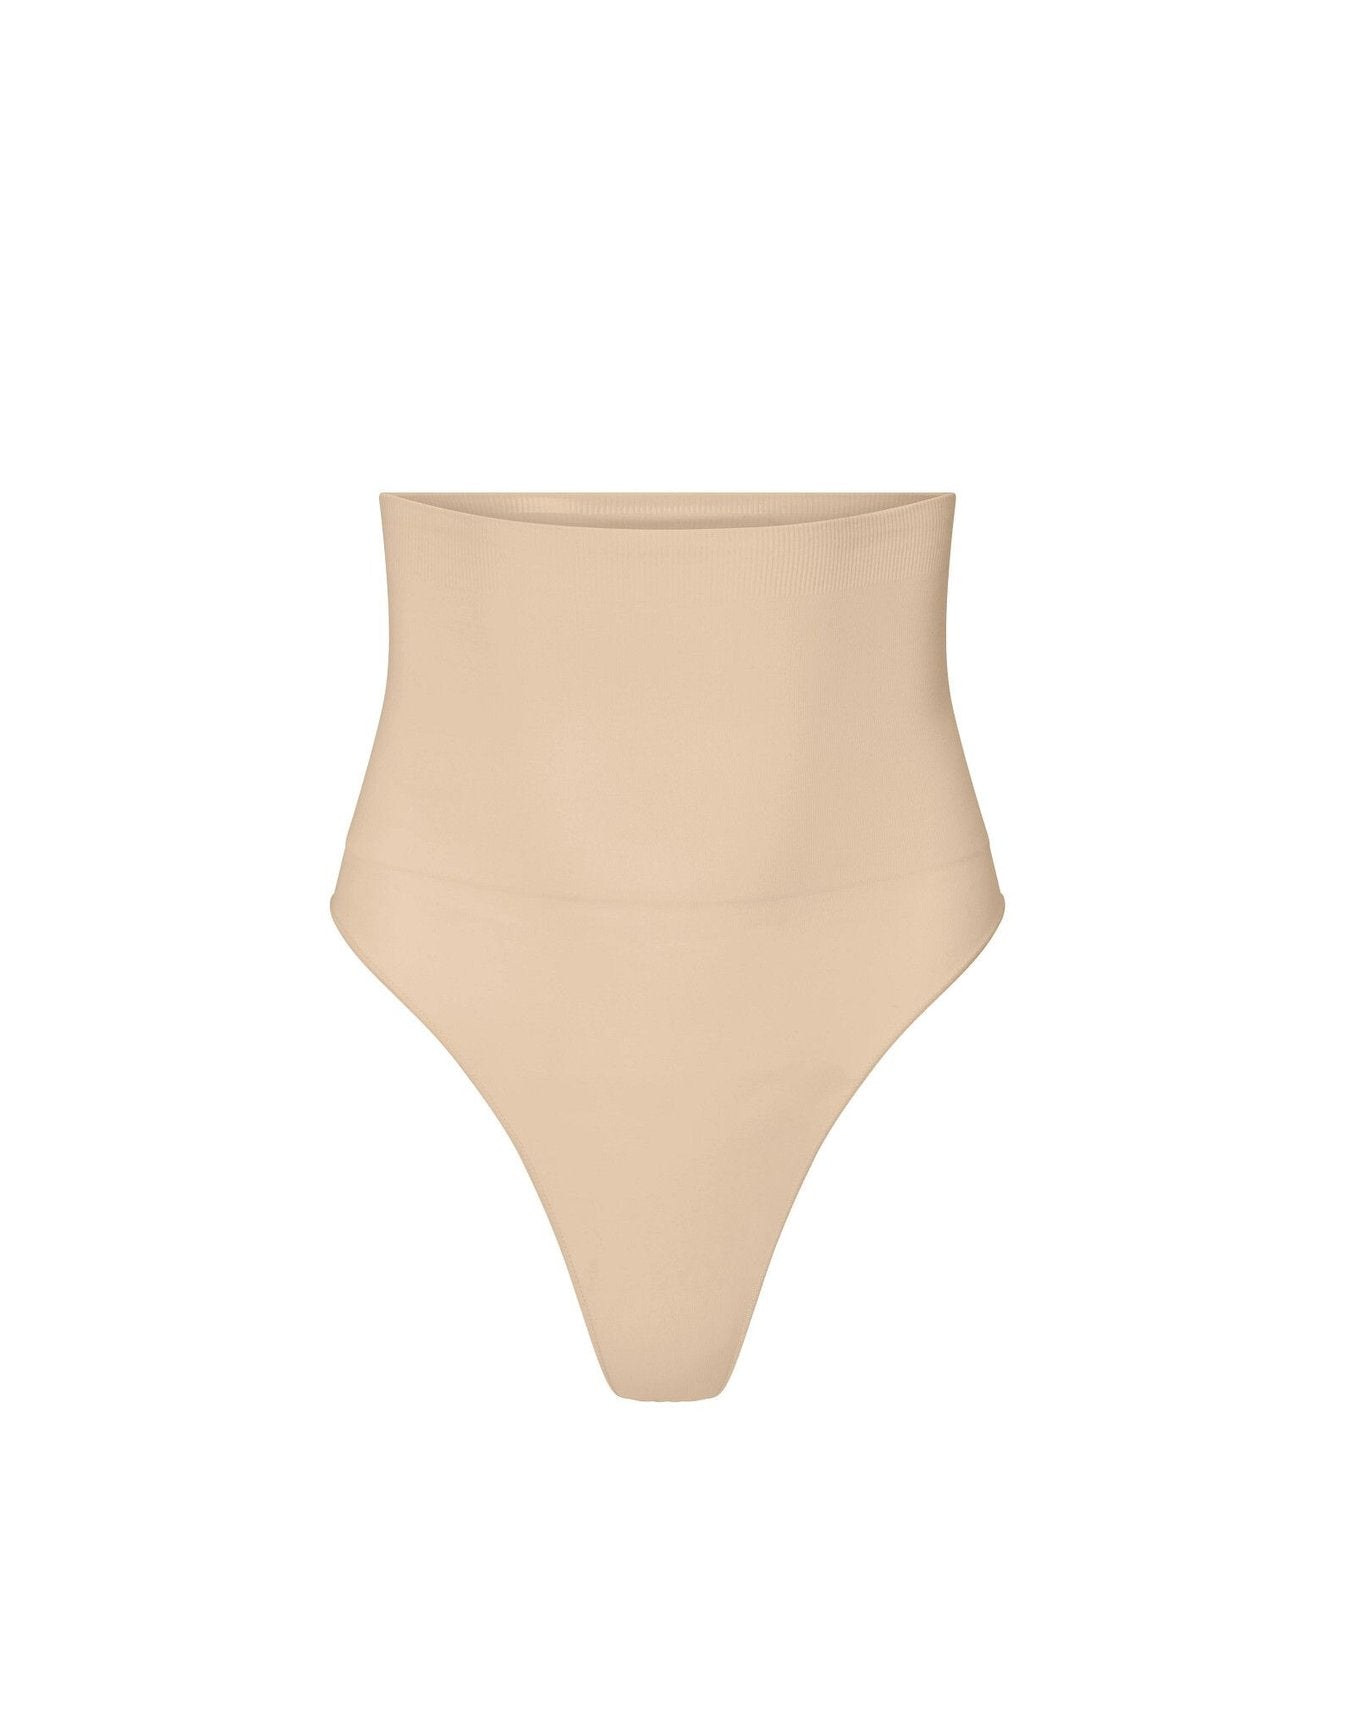 nueskin Elodie High-Compression High-Waist Thong in color Dawn and shape thong